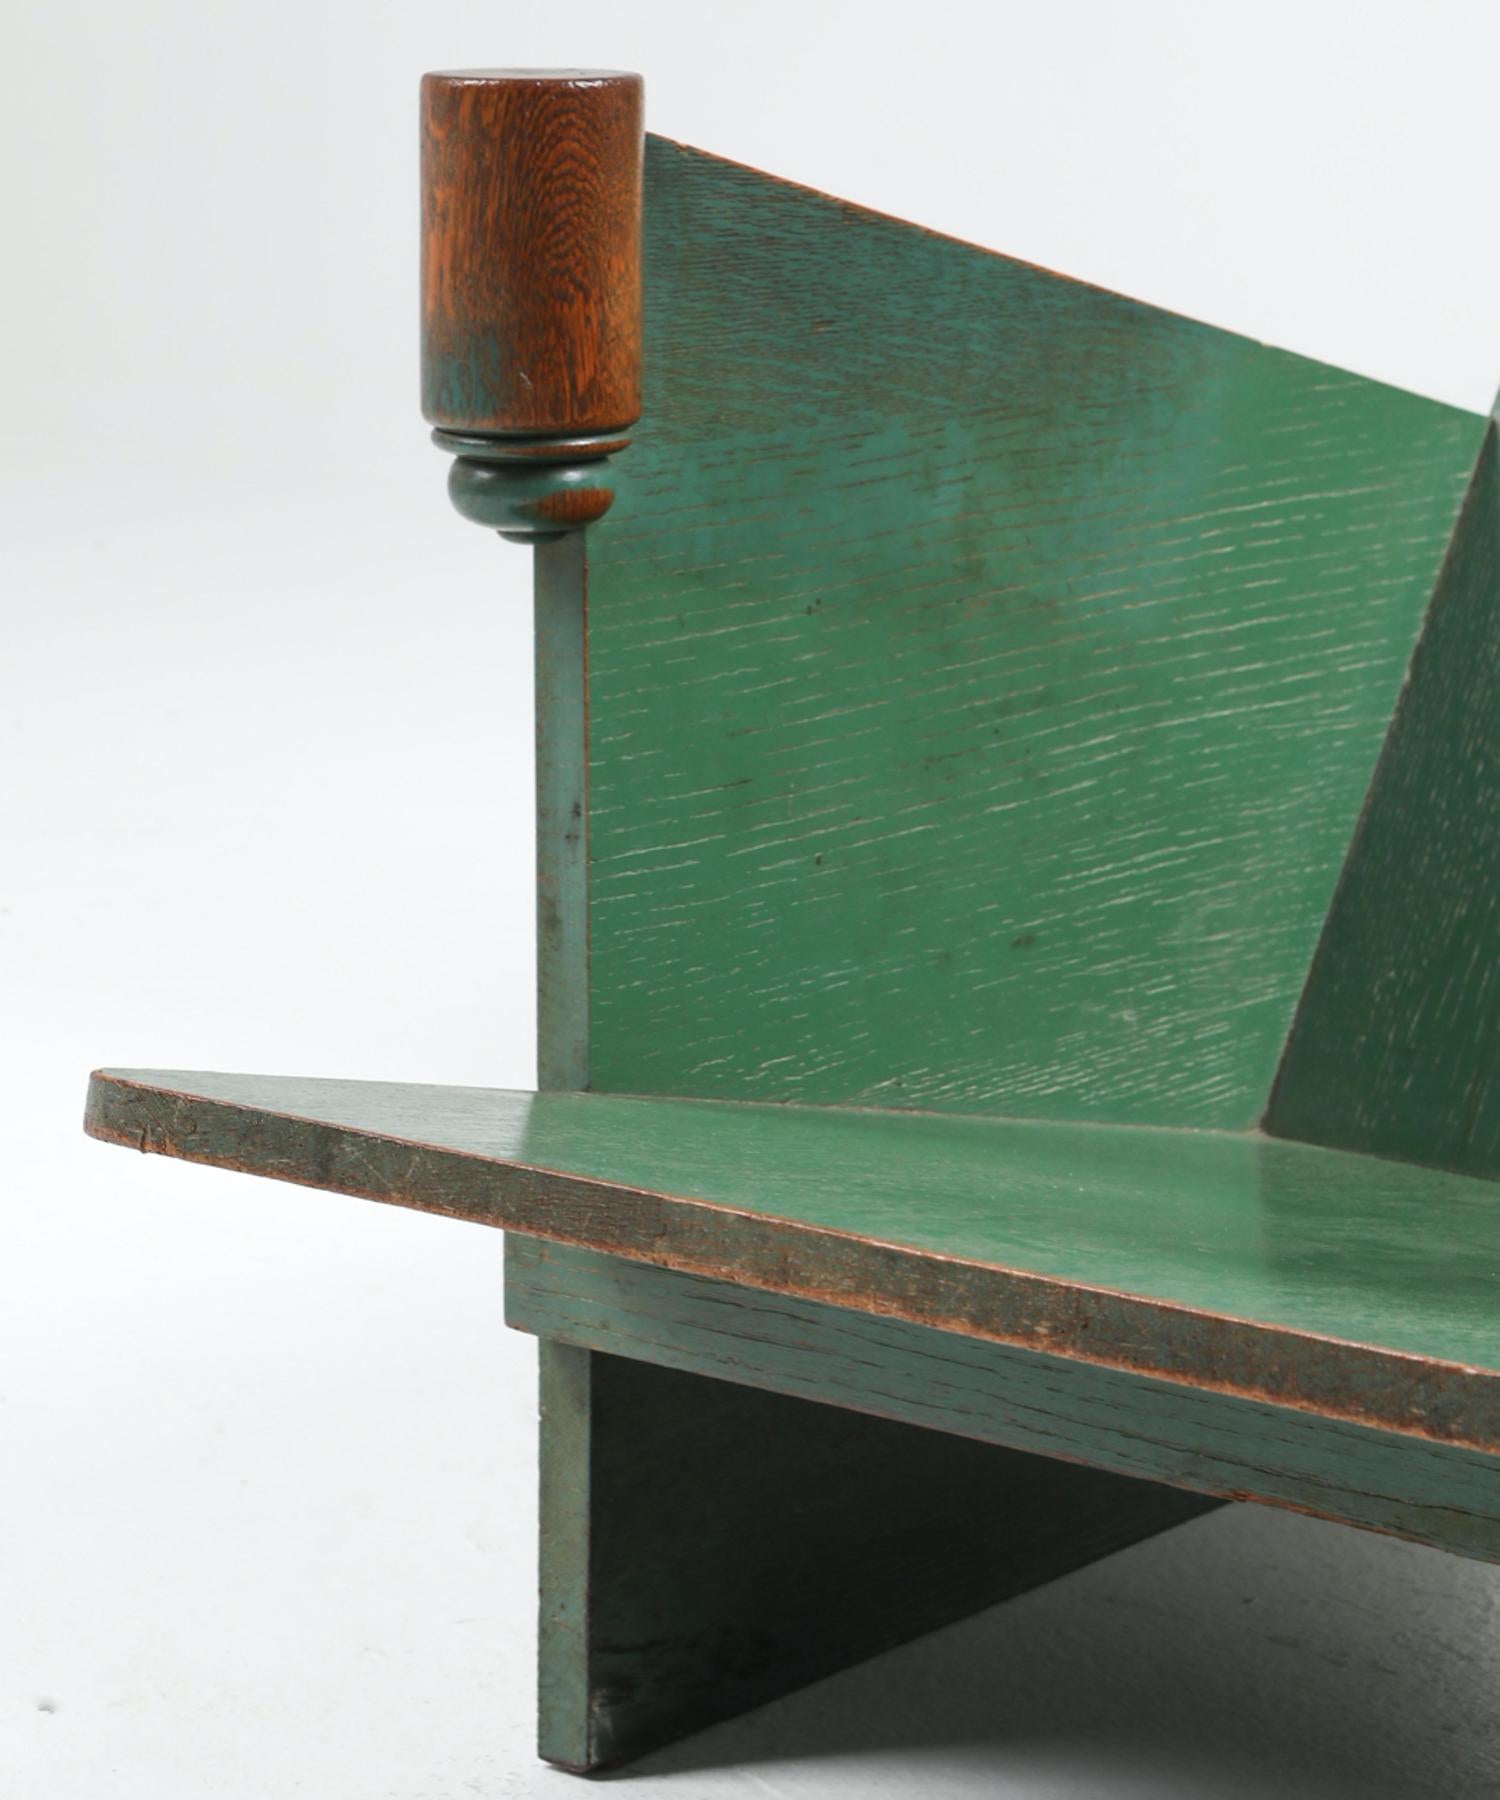 Patinated Constructivist Green Lounge Chairs by Hosts & Maes